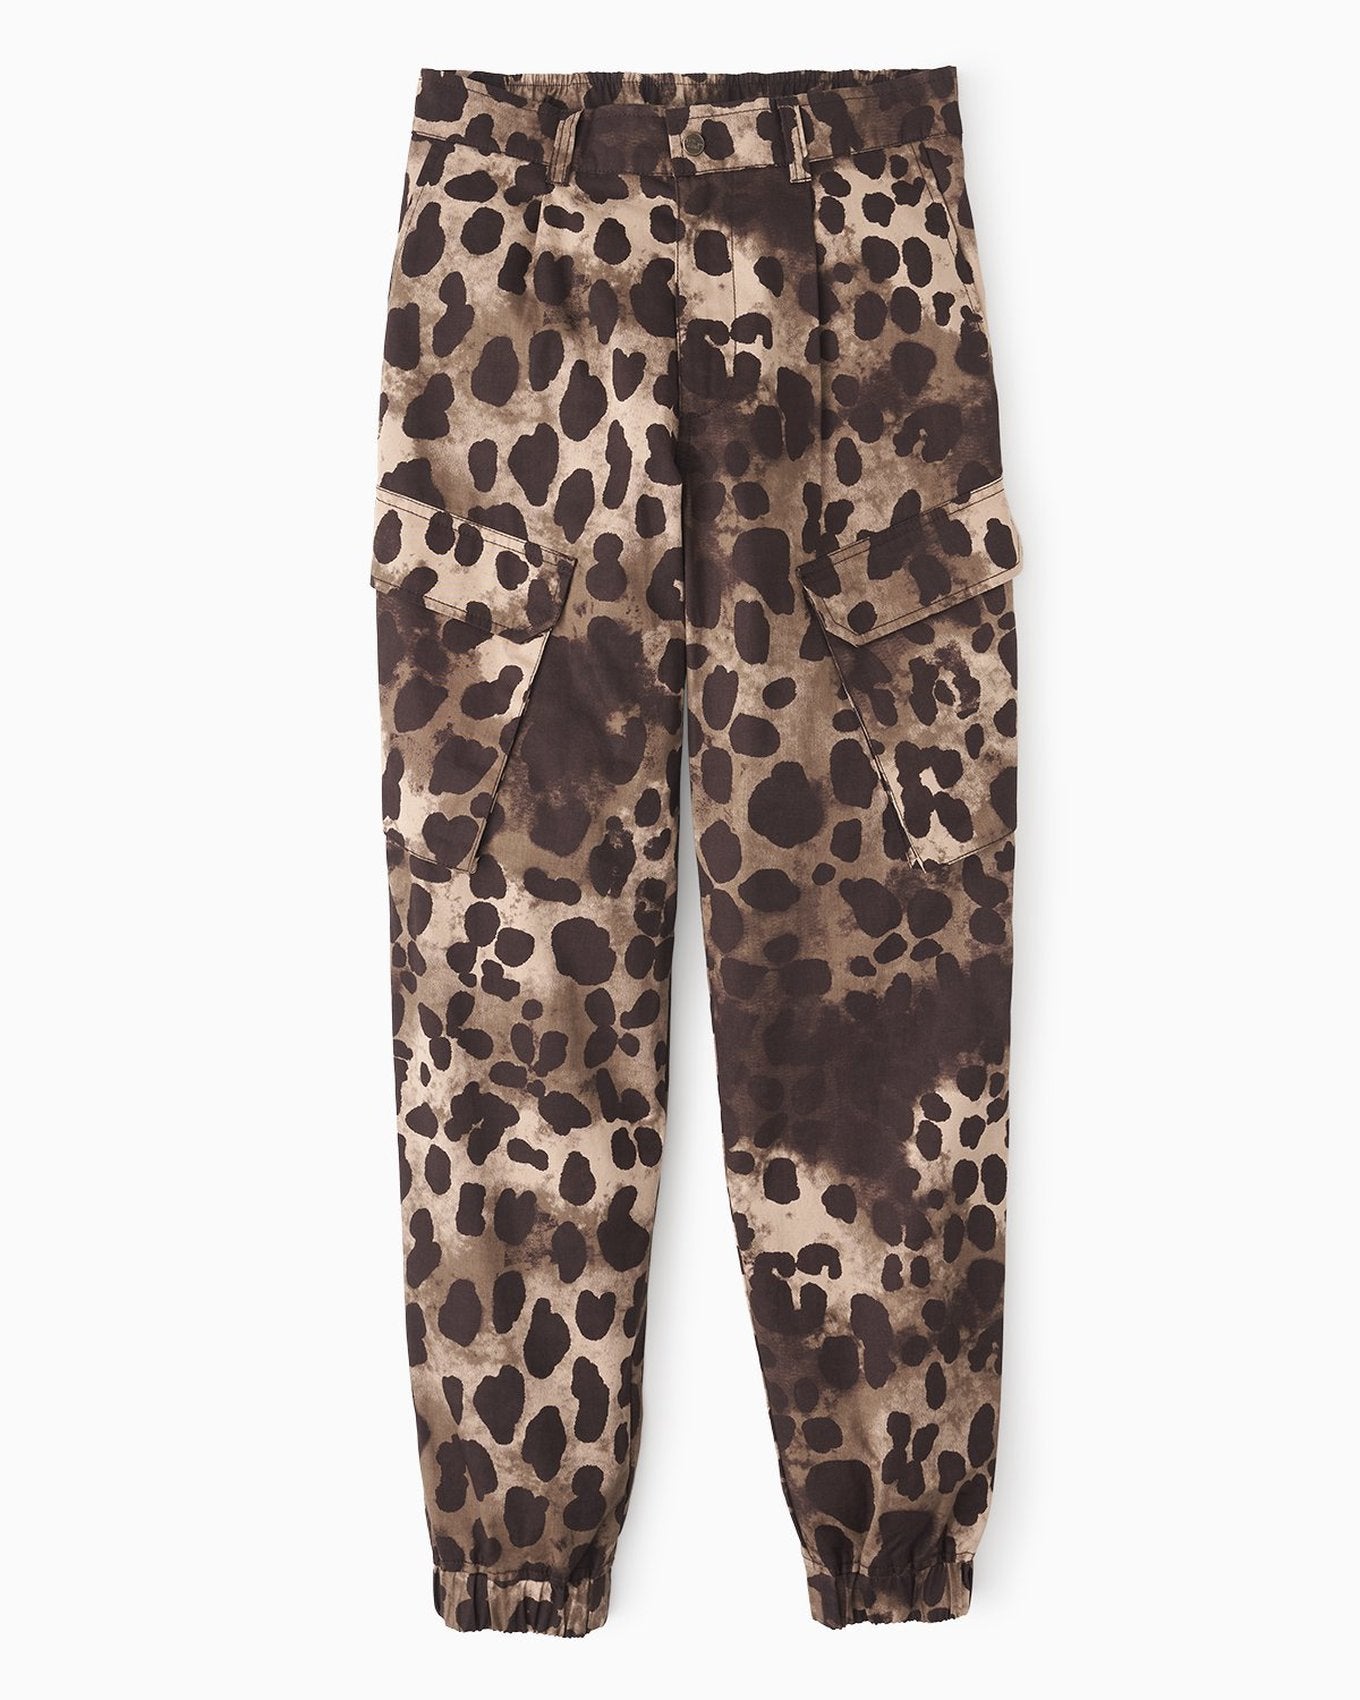 YesAnd Organic Print Utility Jogger Jogger in color Classic Leopard C01 and shape jogger/sweatpant